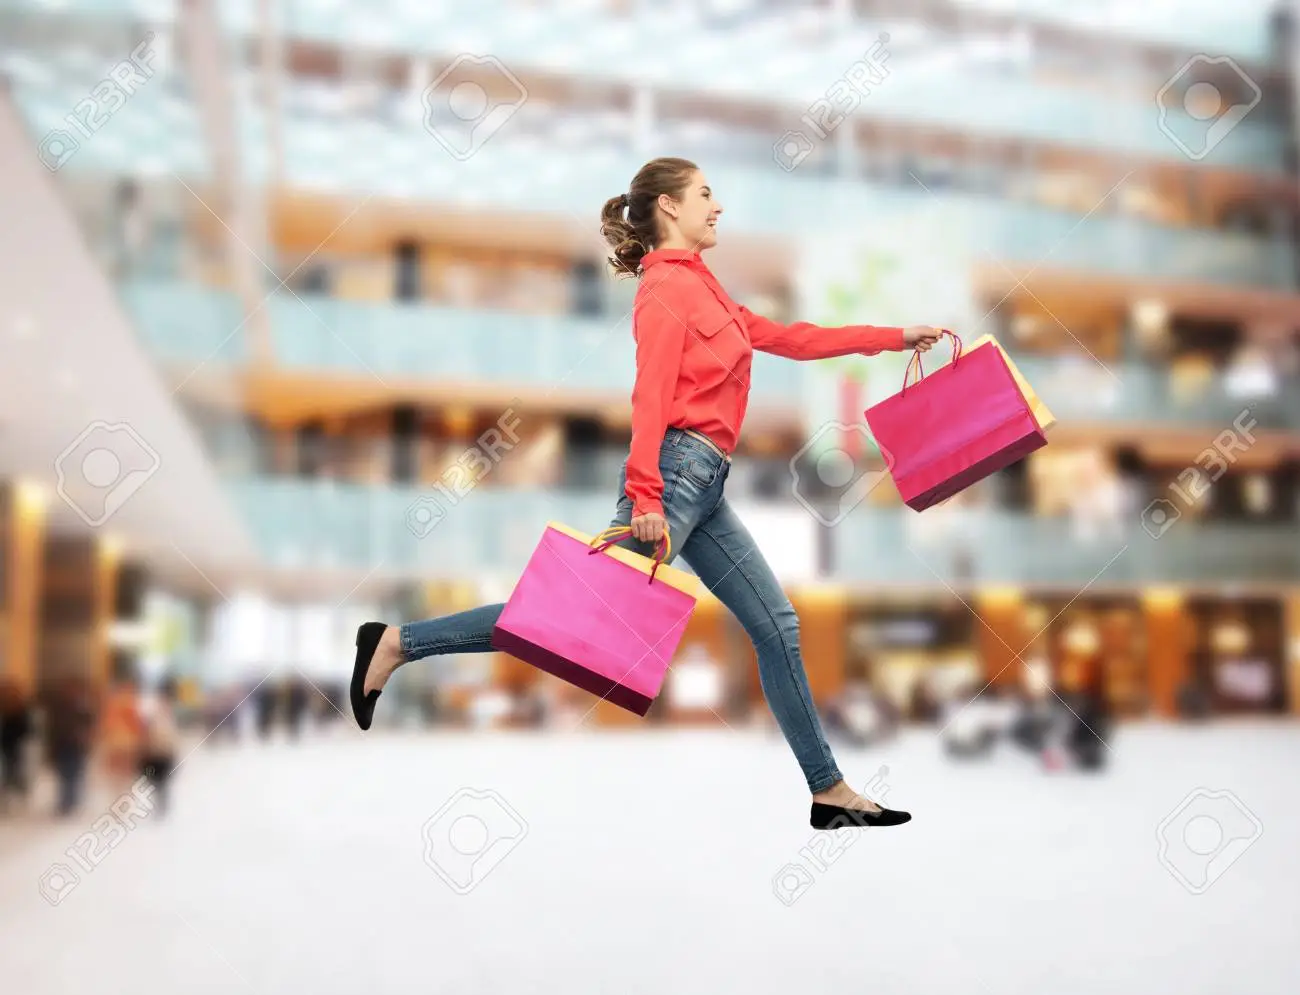 Girl with bags in the air Blank Meme Template